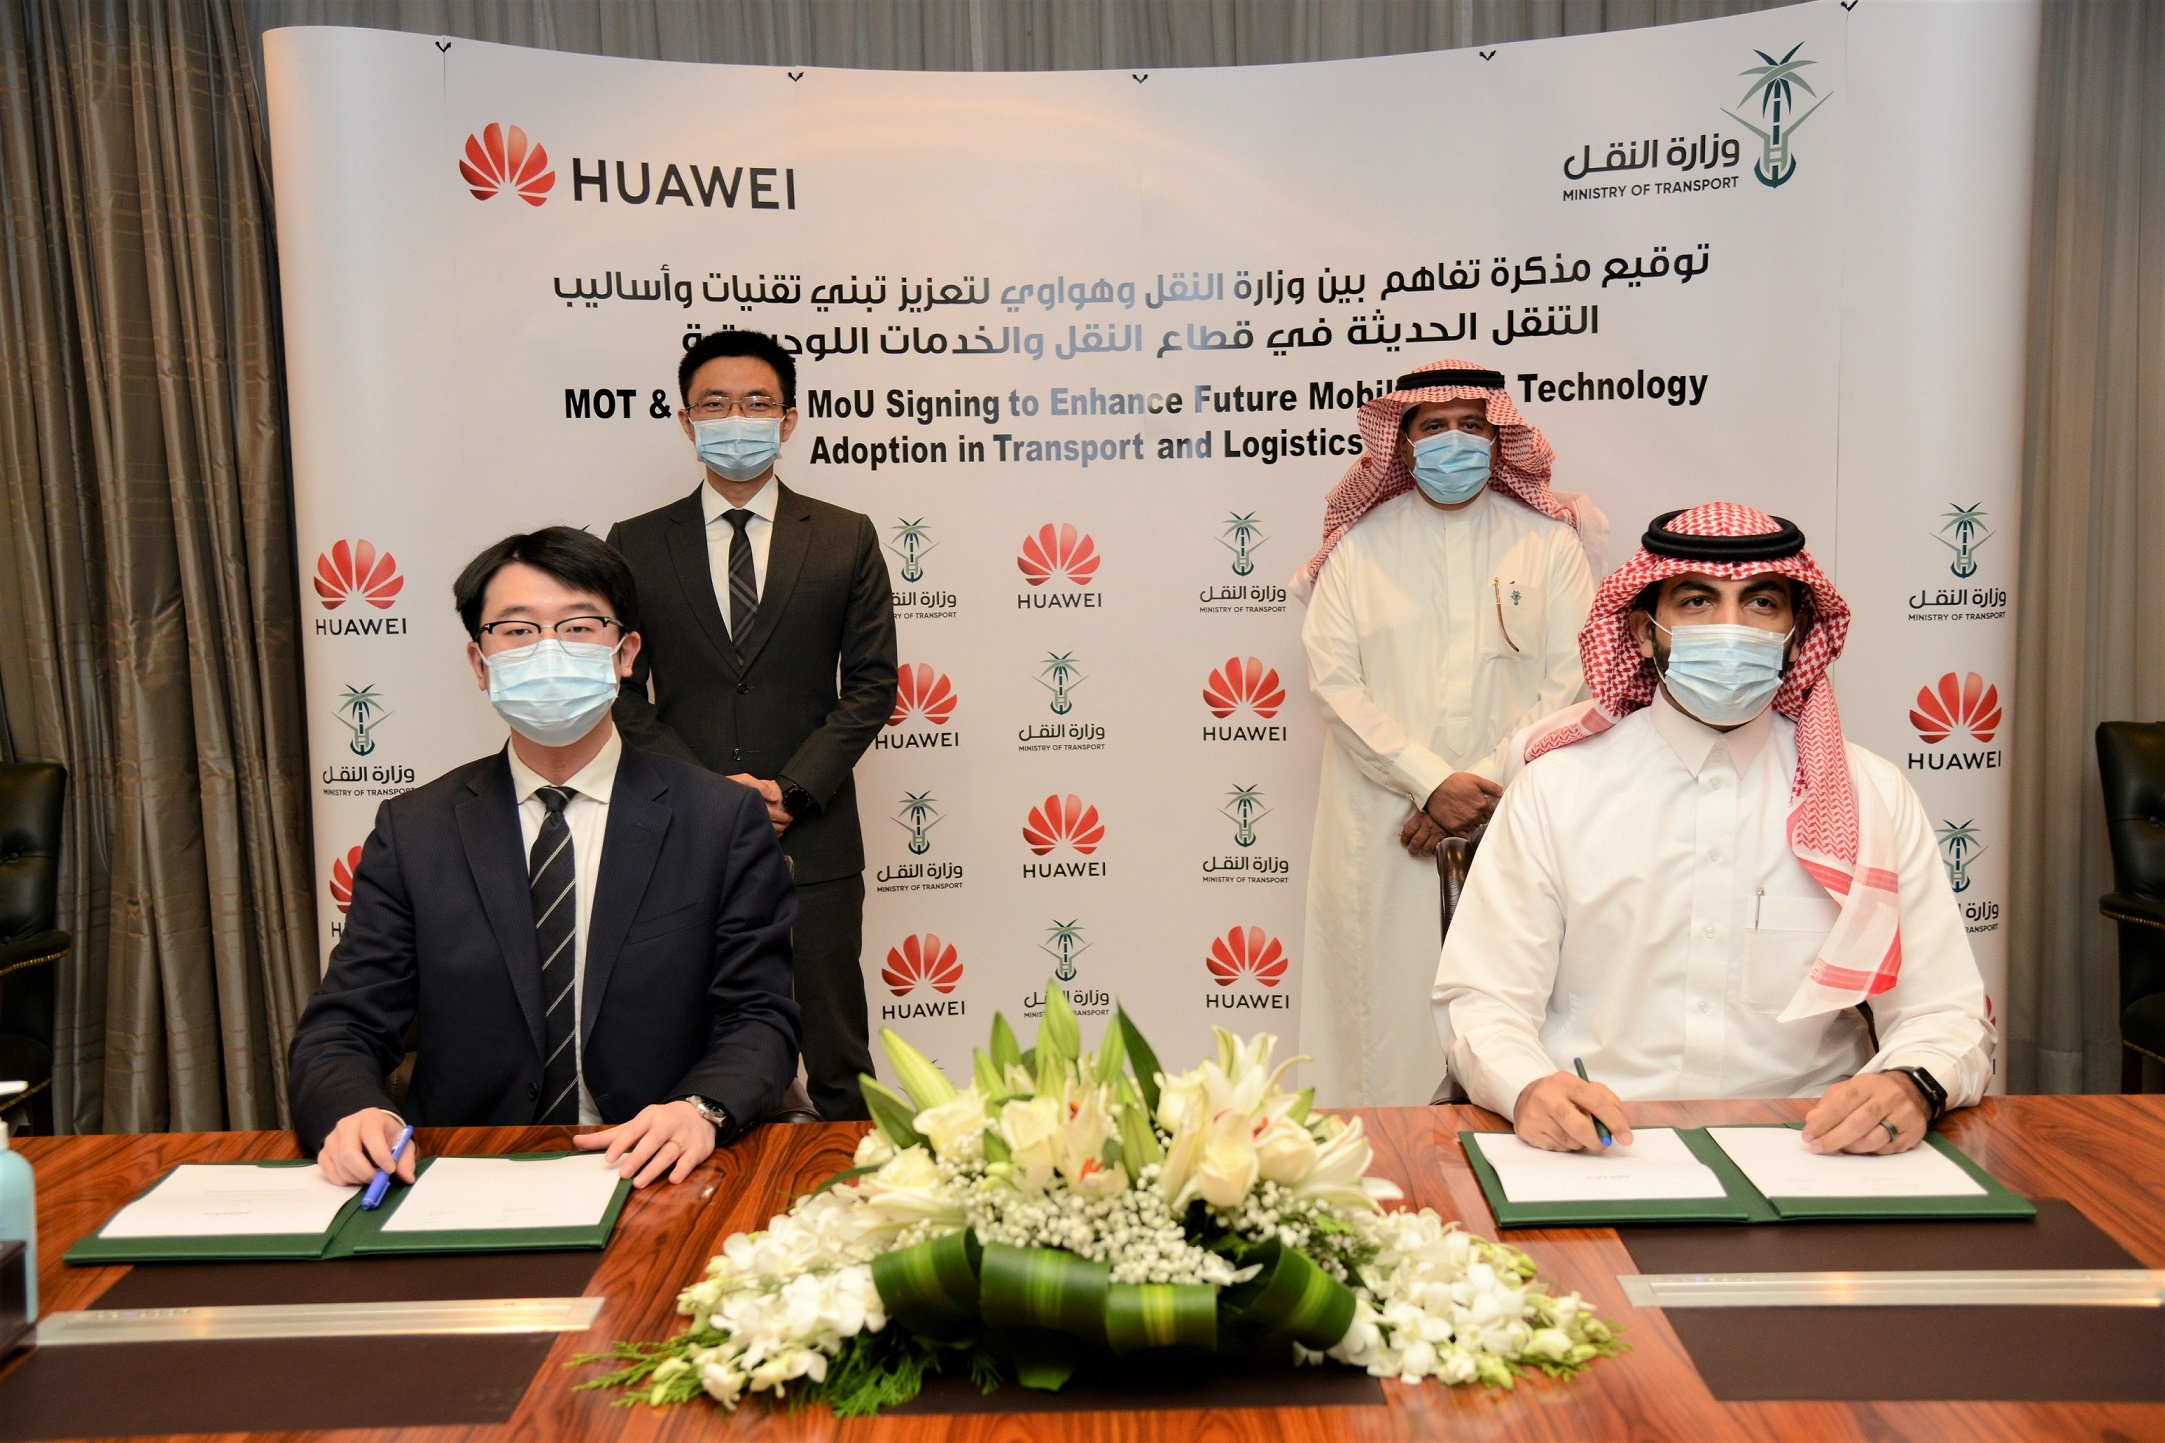 Saudi Ministry of Transport Signs MoU with Huawei to Enhance Future Mobility and Technology Adoption in Transport and Logistics Sector